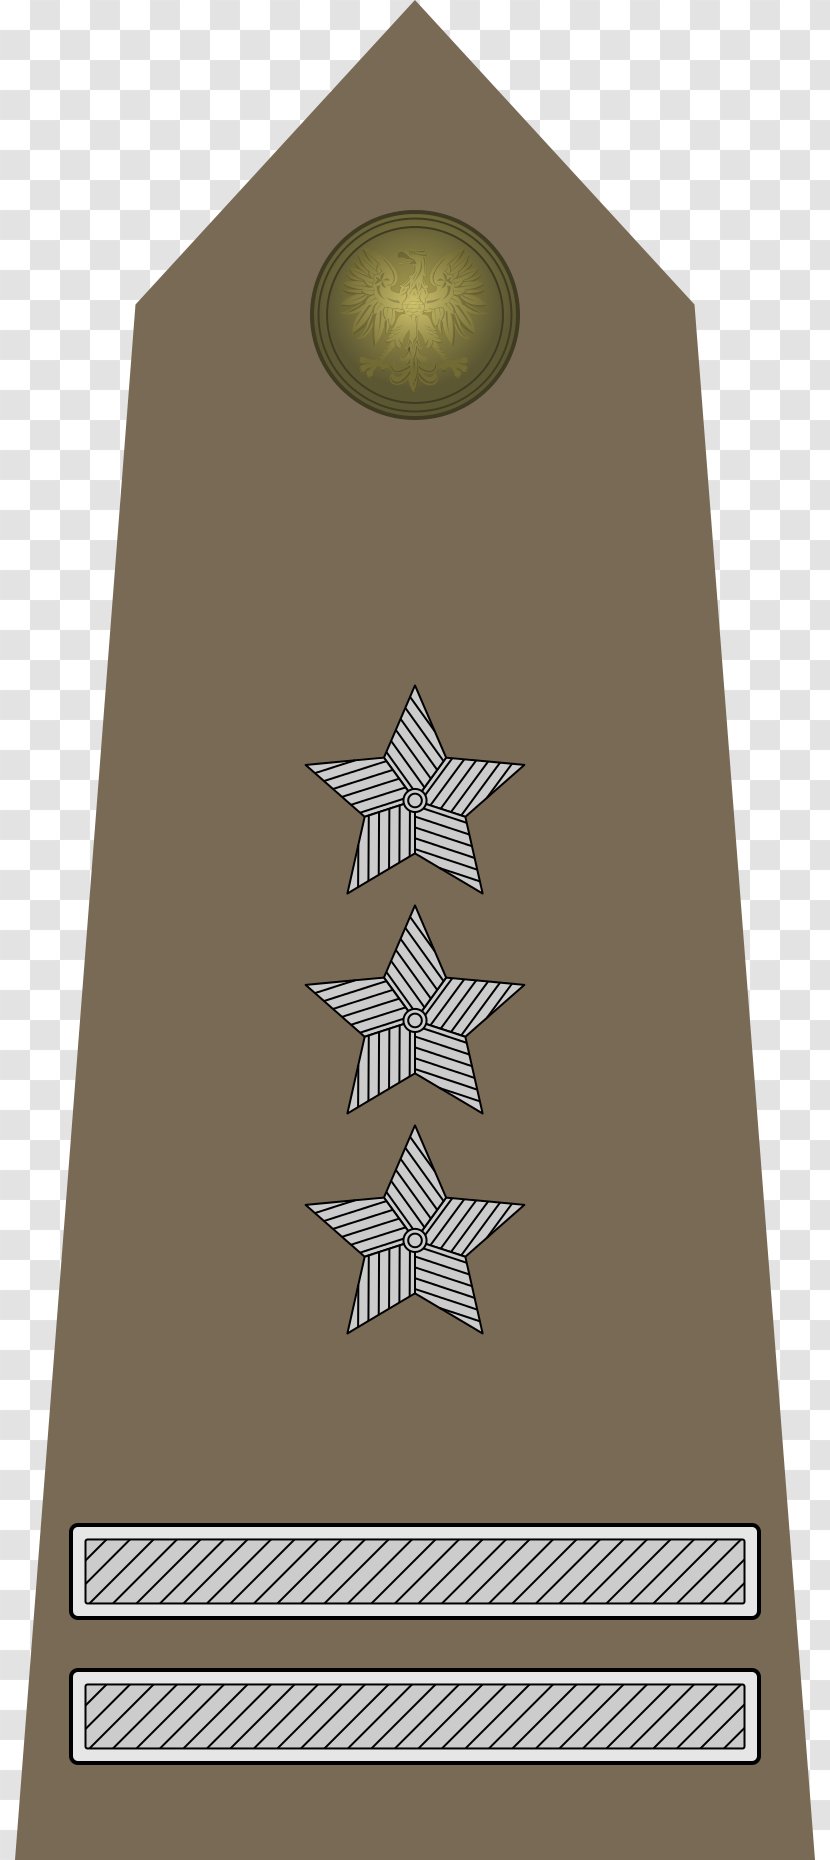 Military Rank Major General Army Officer - Of The Transparent PNG